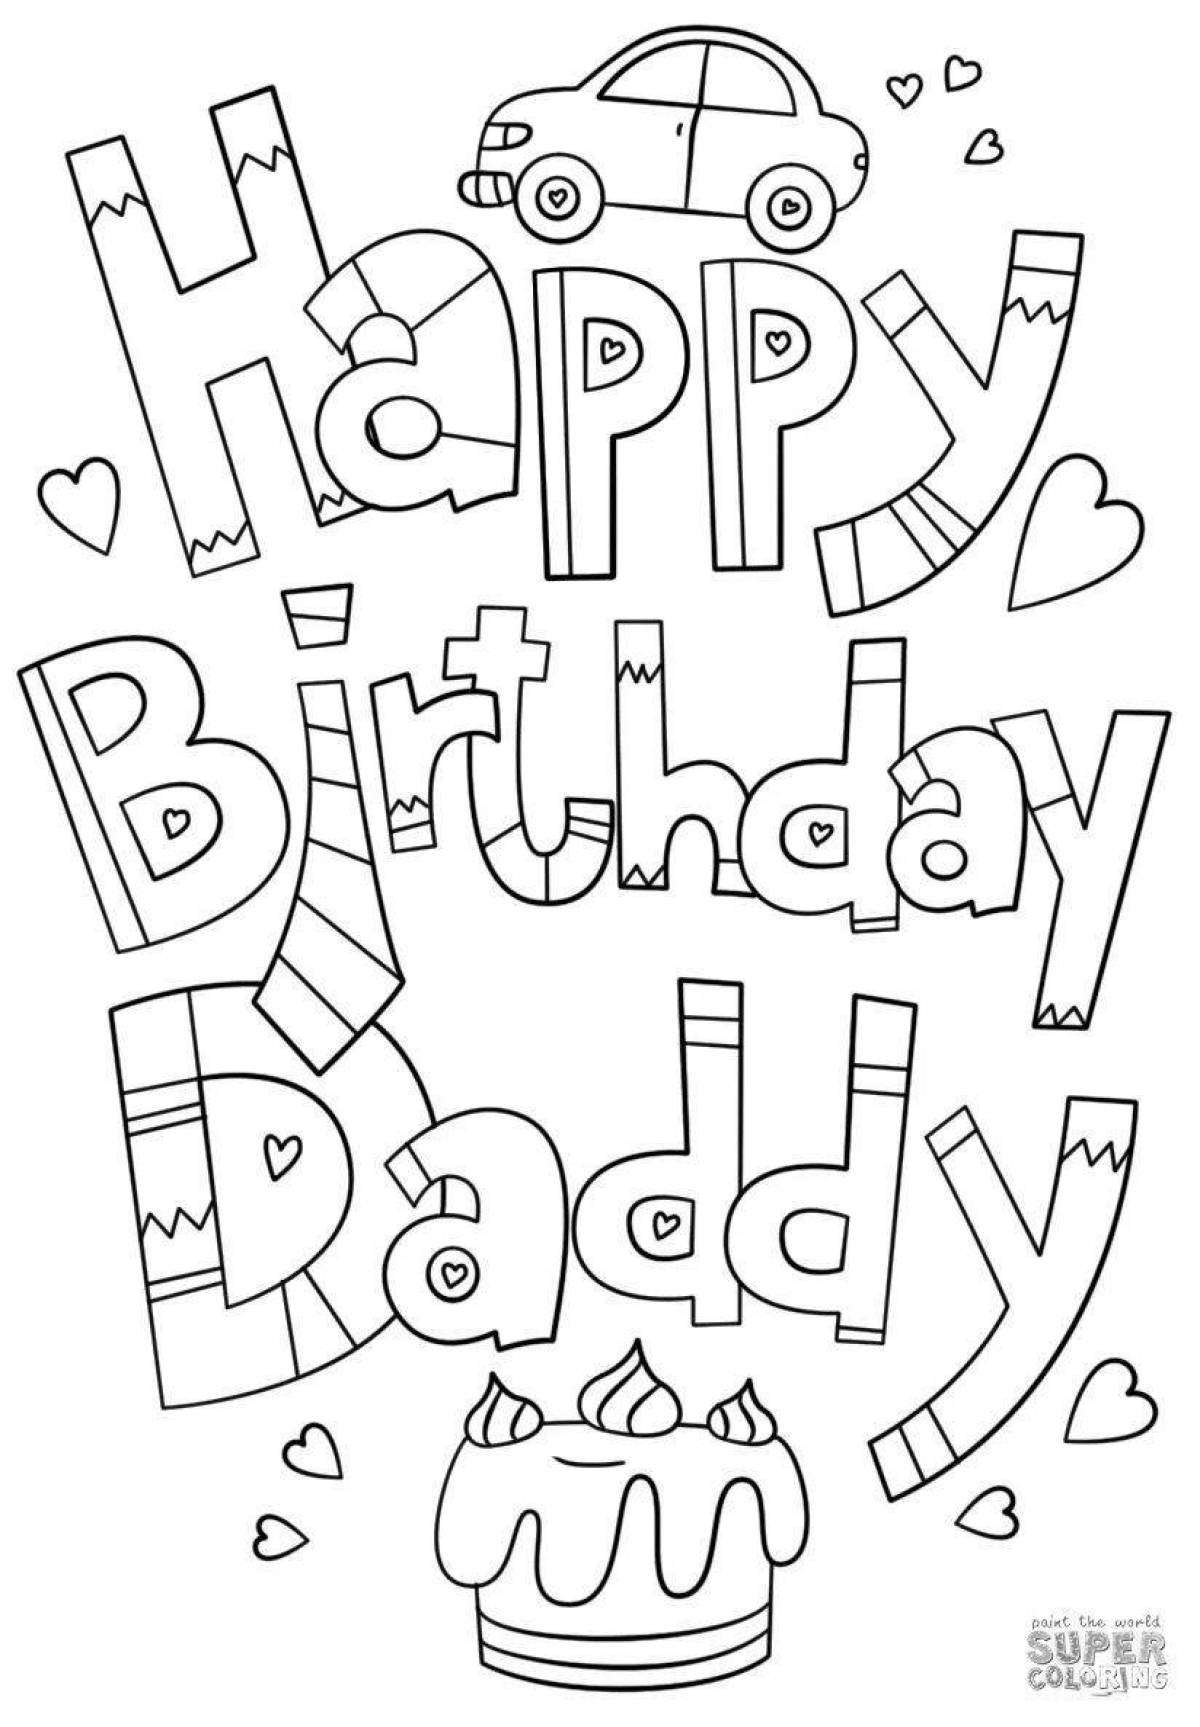 Big card for dad